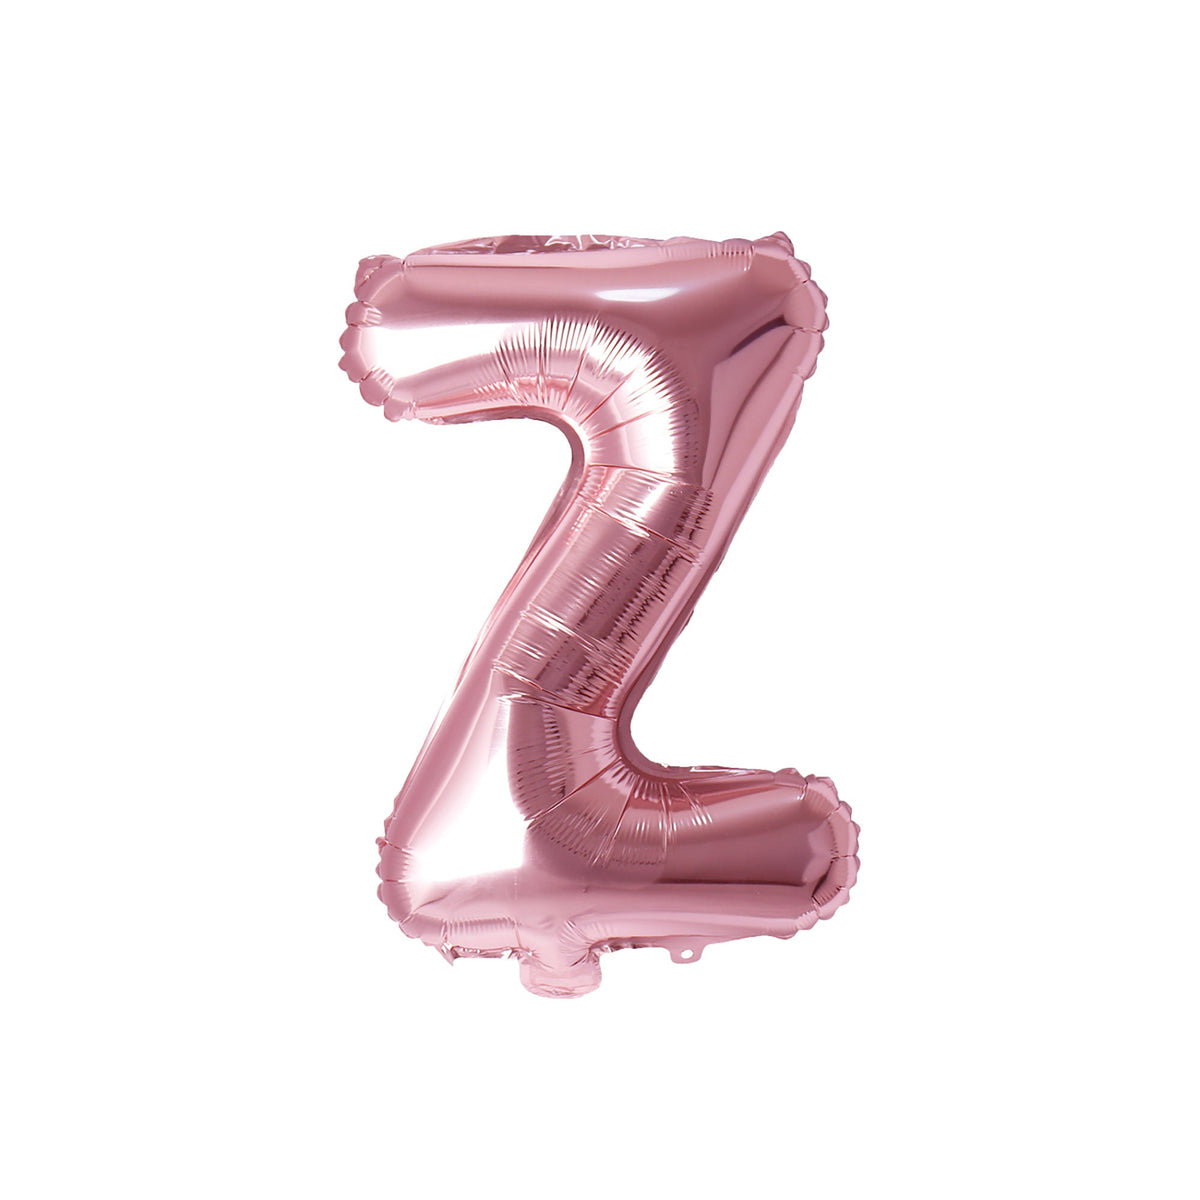 PARTY EXPERT Balloons Rose Gold Letter Z Foil Balloon, 16 Inches, 1 Count 810064194443